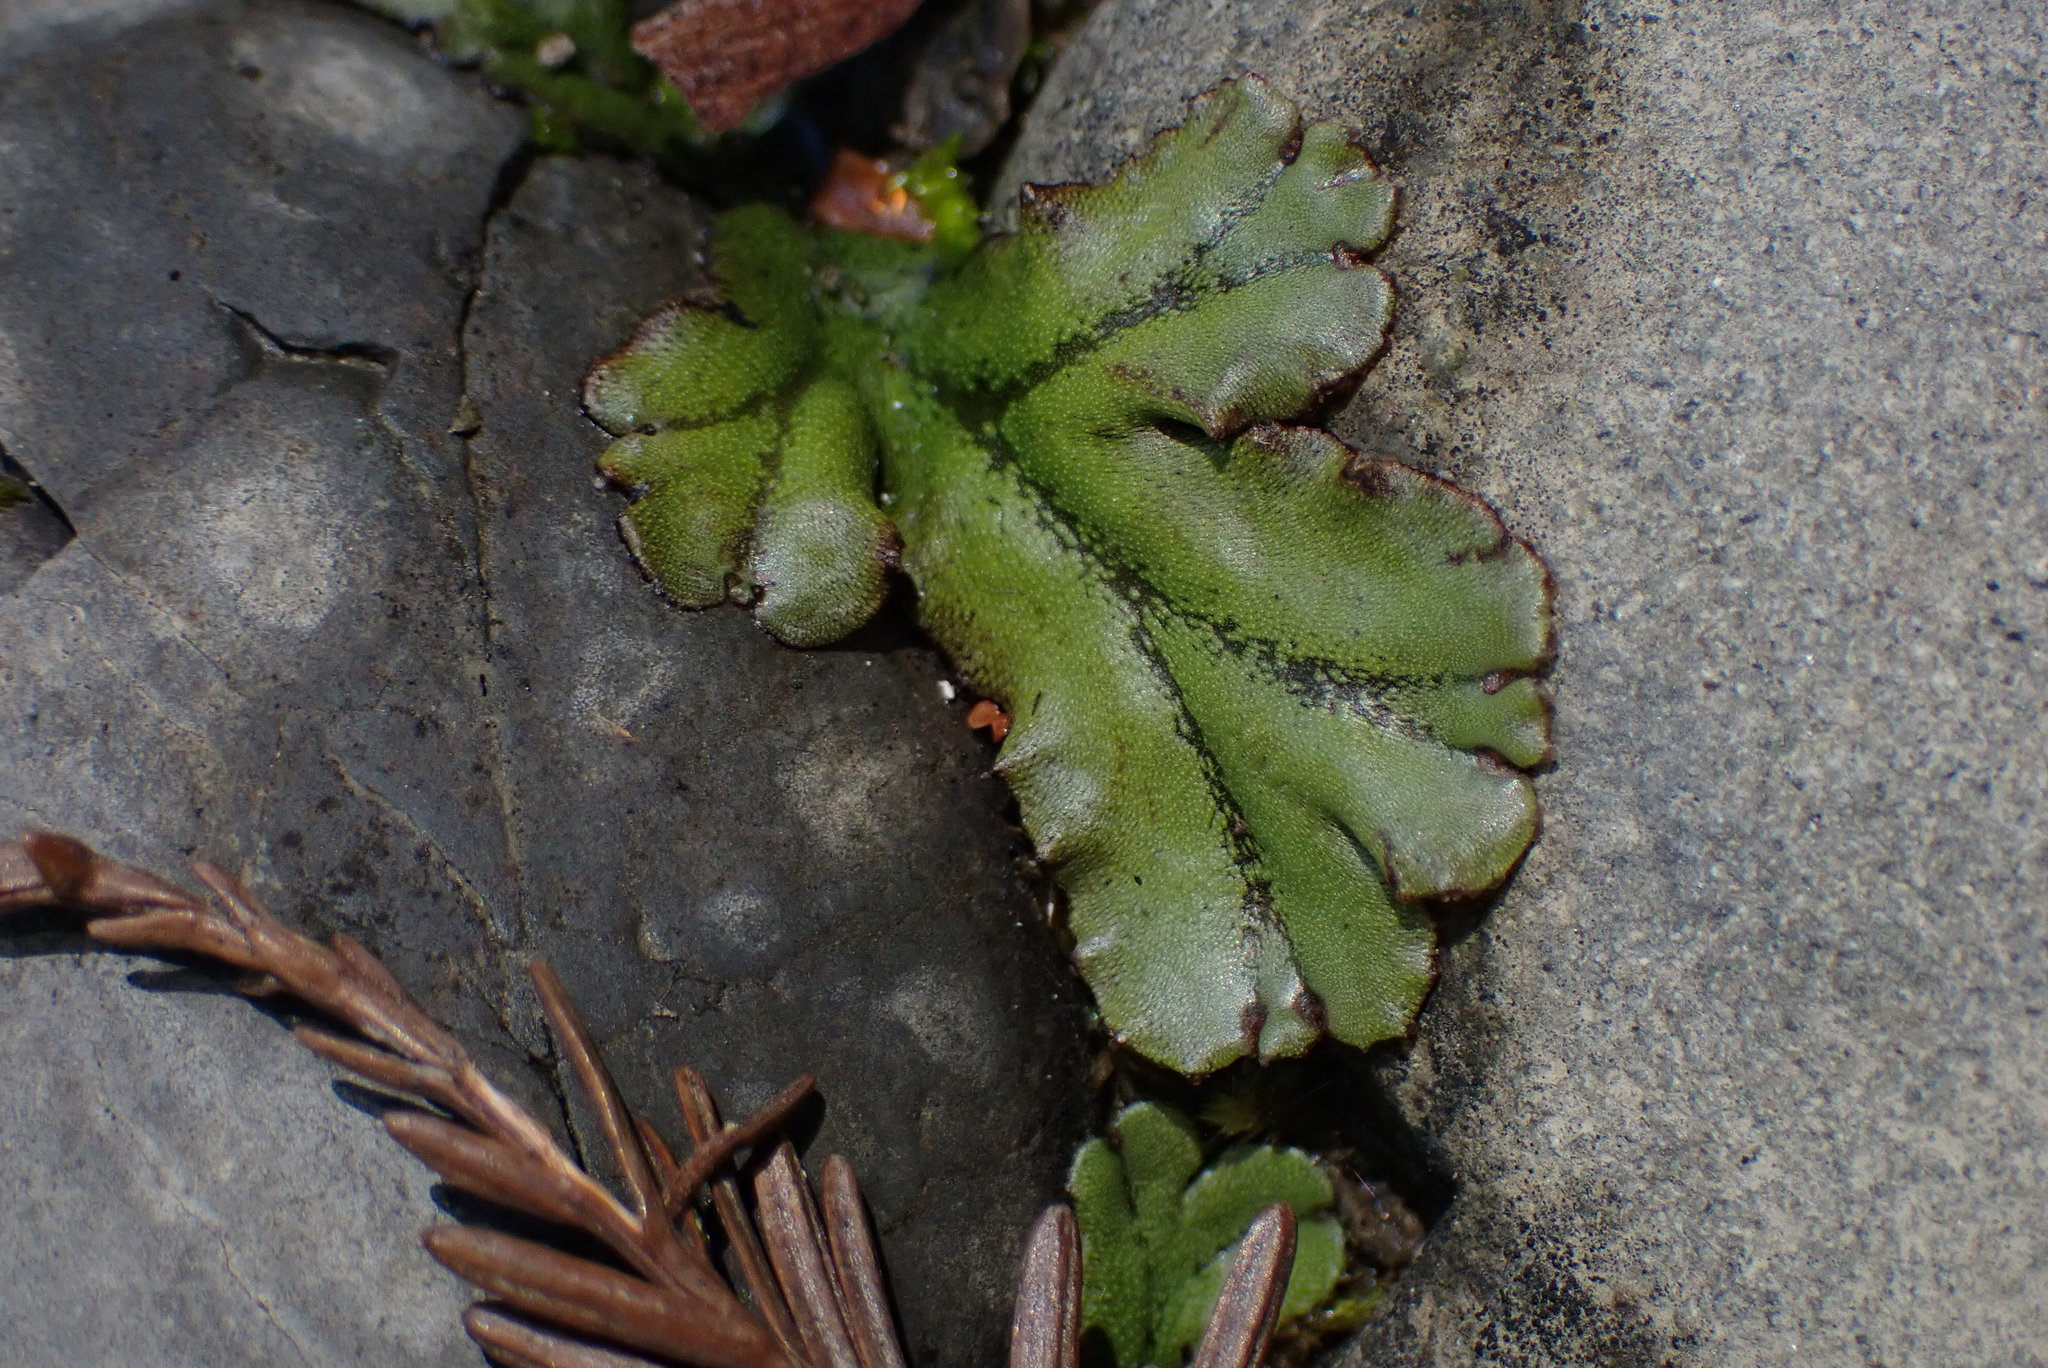 A flat green thallus grows between rounded rocks in what looks like a riparian area